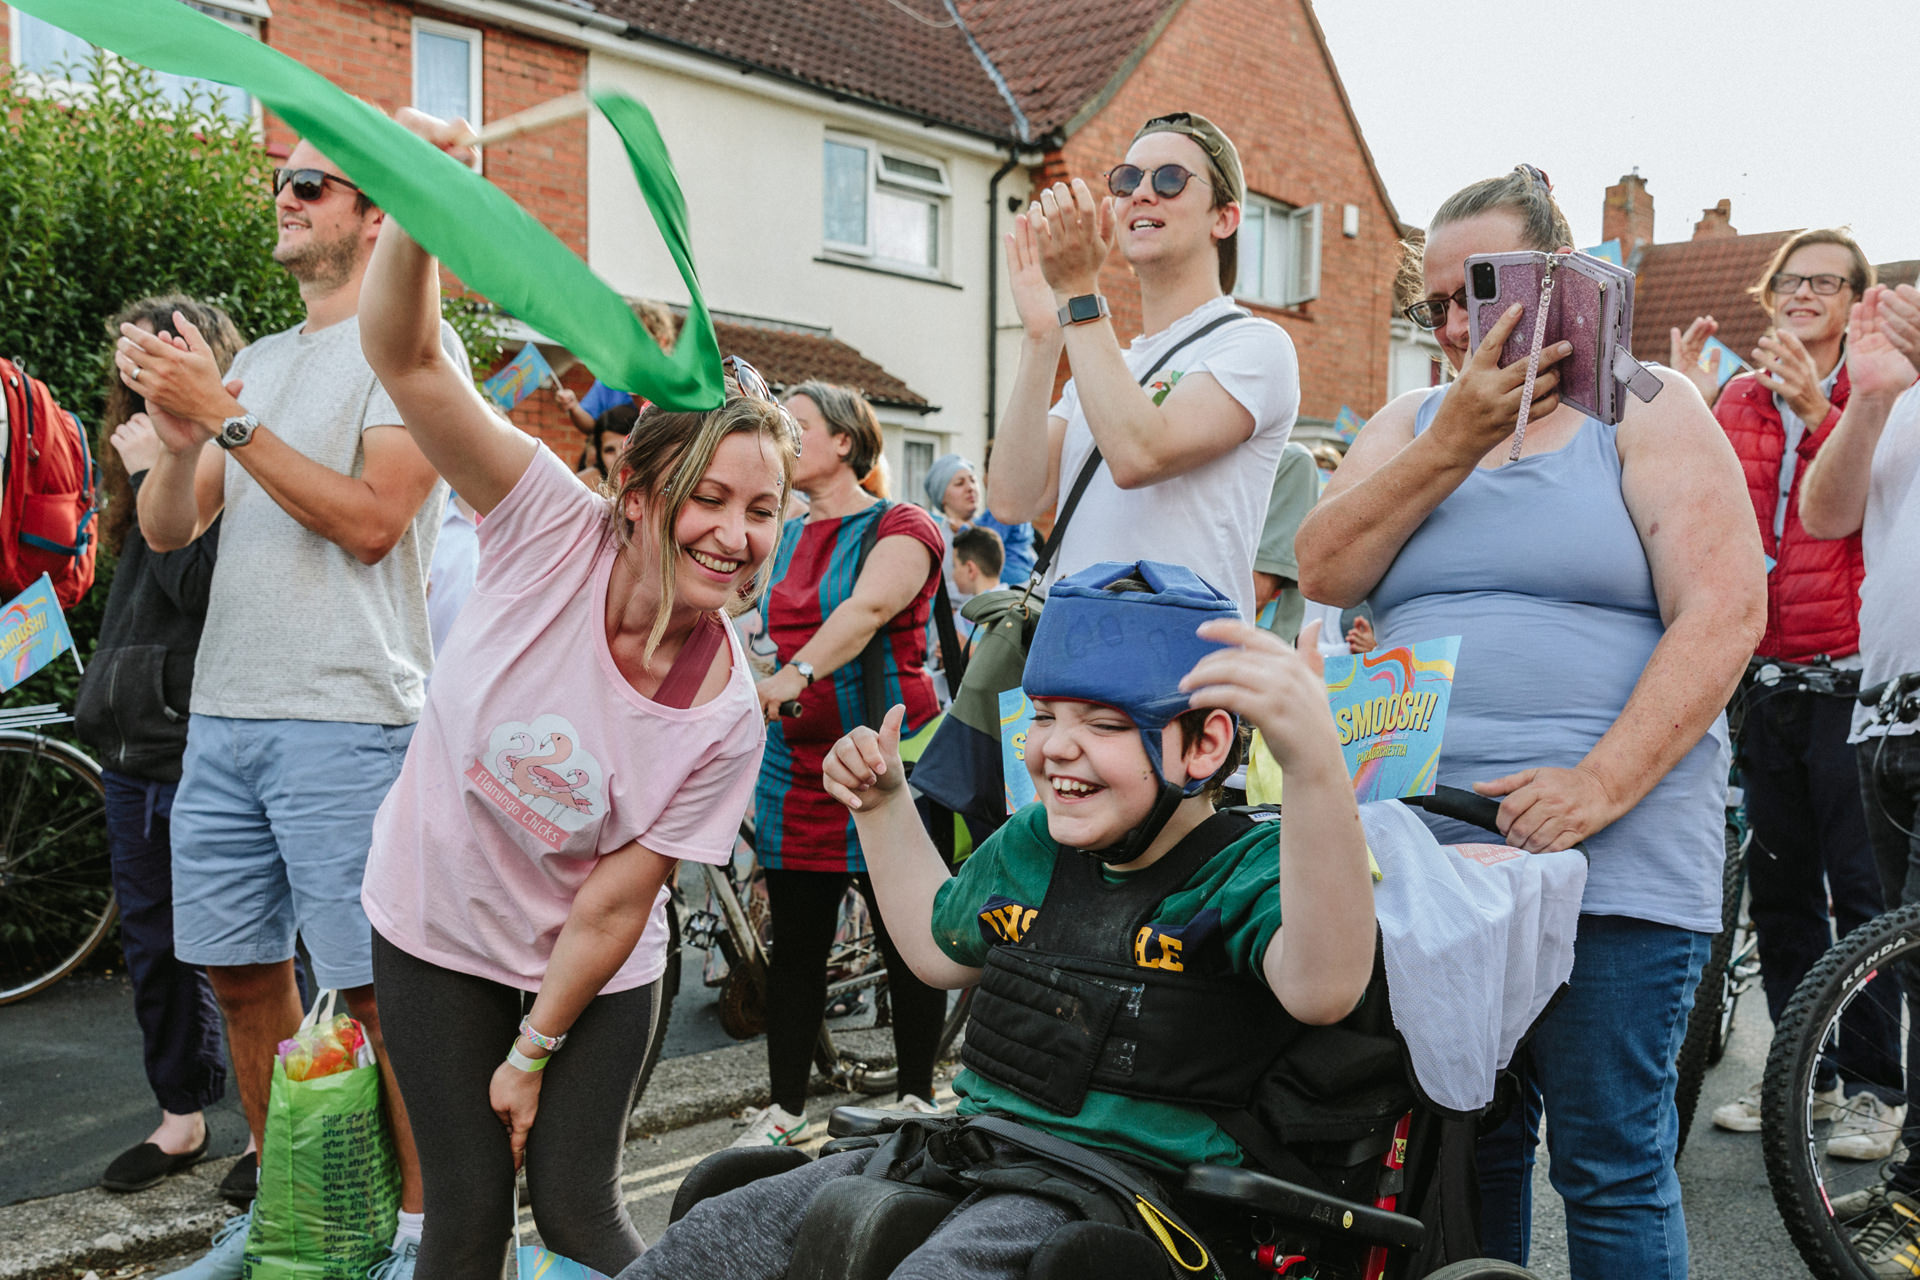 In the foreground a child in wheelchair beaming with joy with arms stretched up by his head dancing. To his left a laughing woman waves a green flag. The child's carer looks on smiling